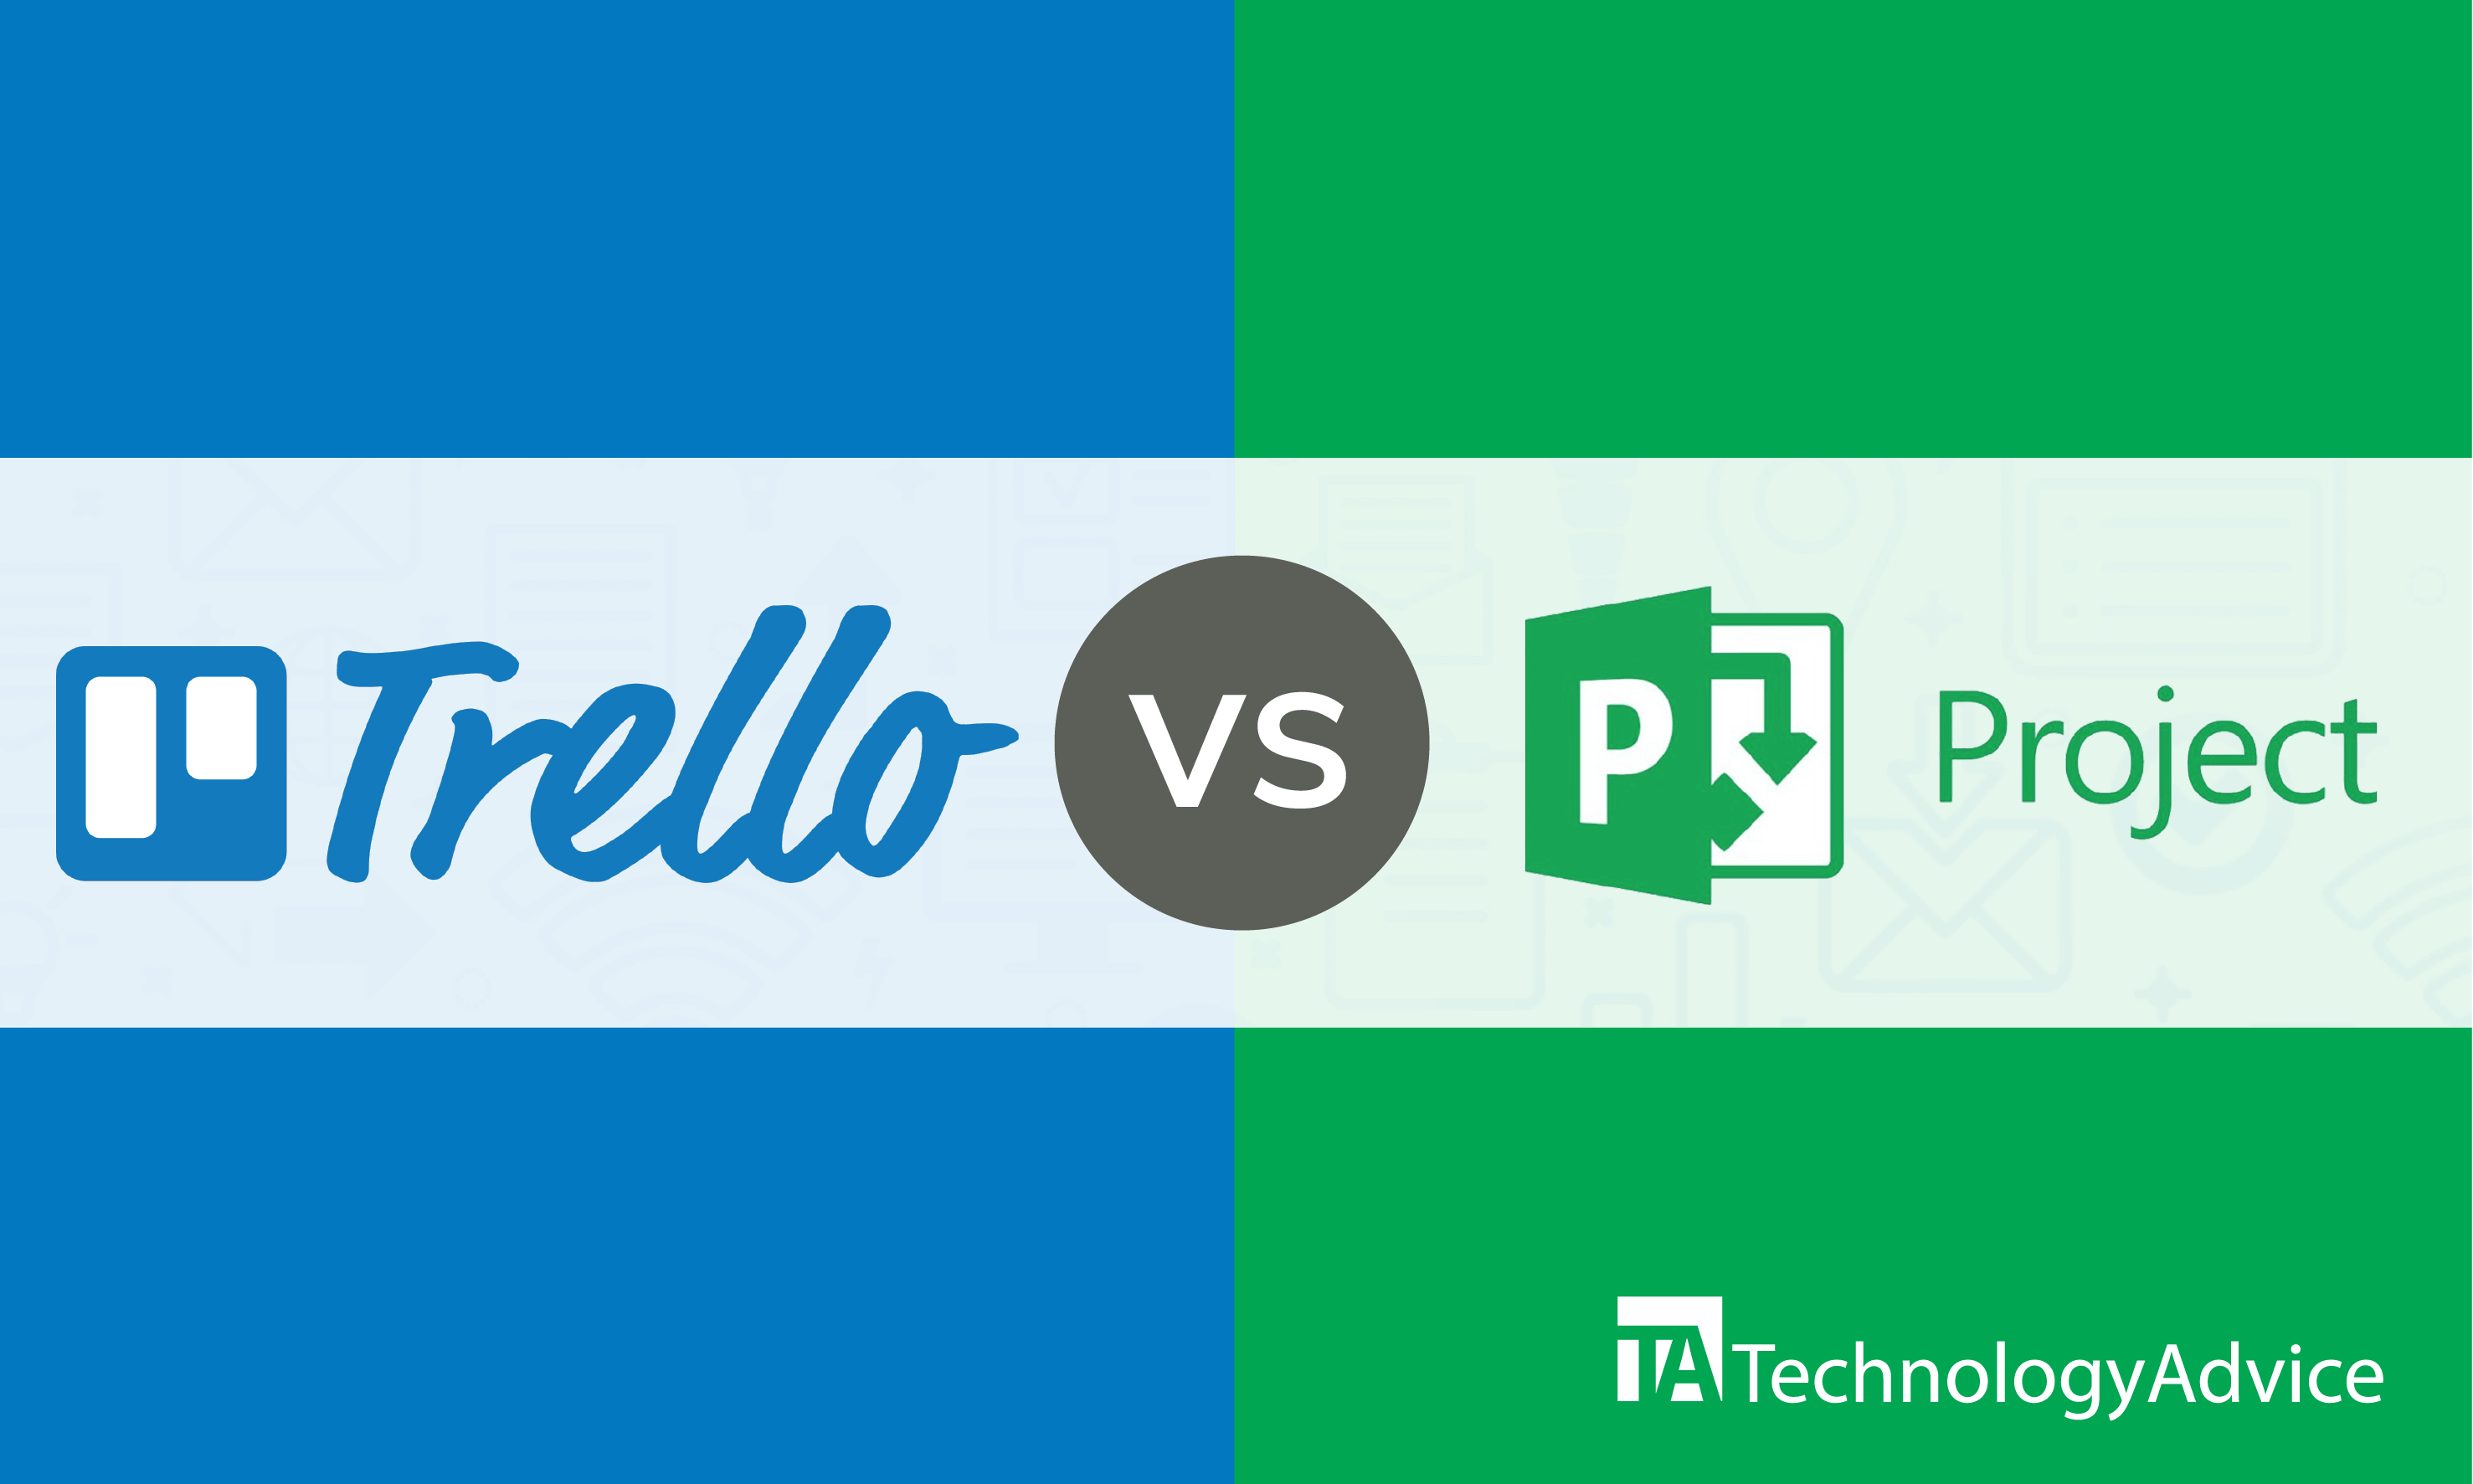 Trello Like Drag and Drop Cards for Project Management Software